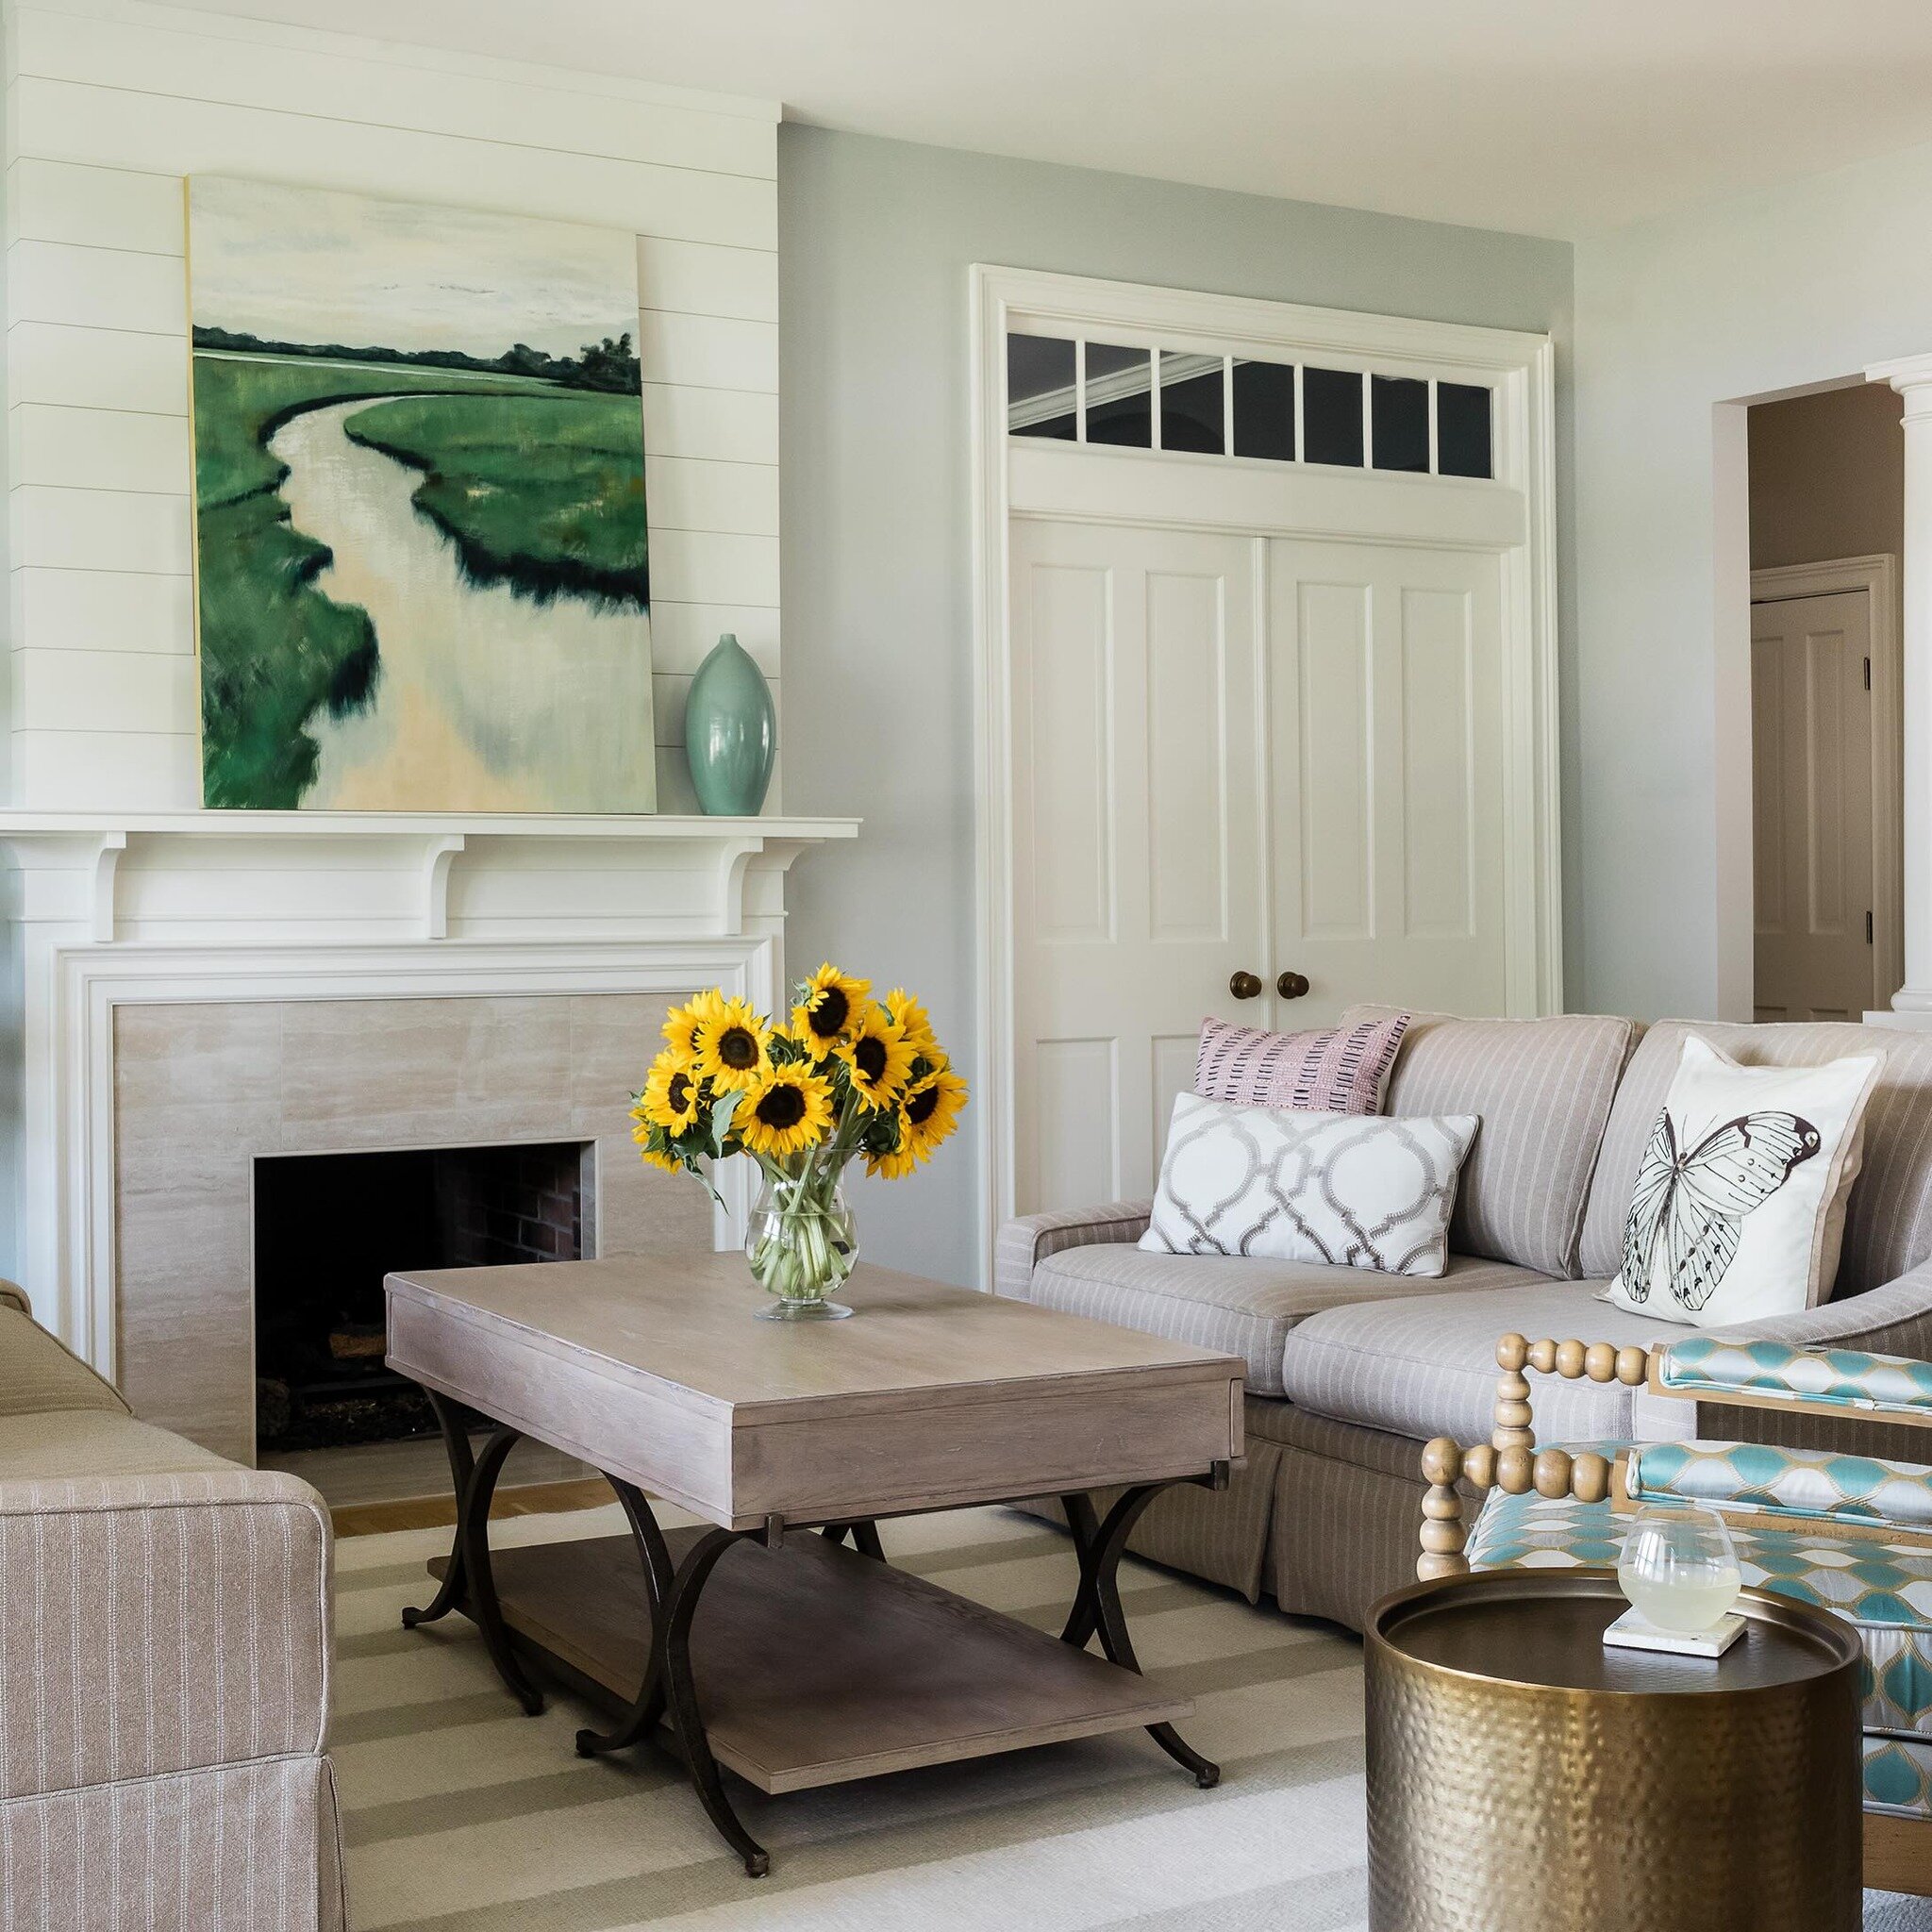 Happy first day of Spring! This Living Room at our #oiscapeneddickretreat project gives Spring time vibes with its soft, warm color palette. 

Photo: @joyellewest 
.
.
.
#opalineis #livingroomdecor #maineliving #oceanhome #oceanhomemag #oceanlifestyl